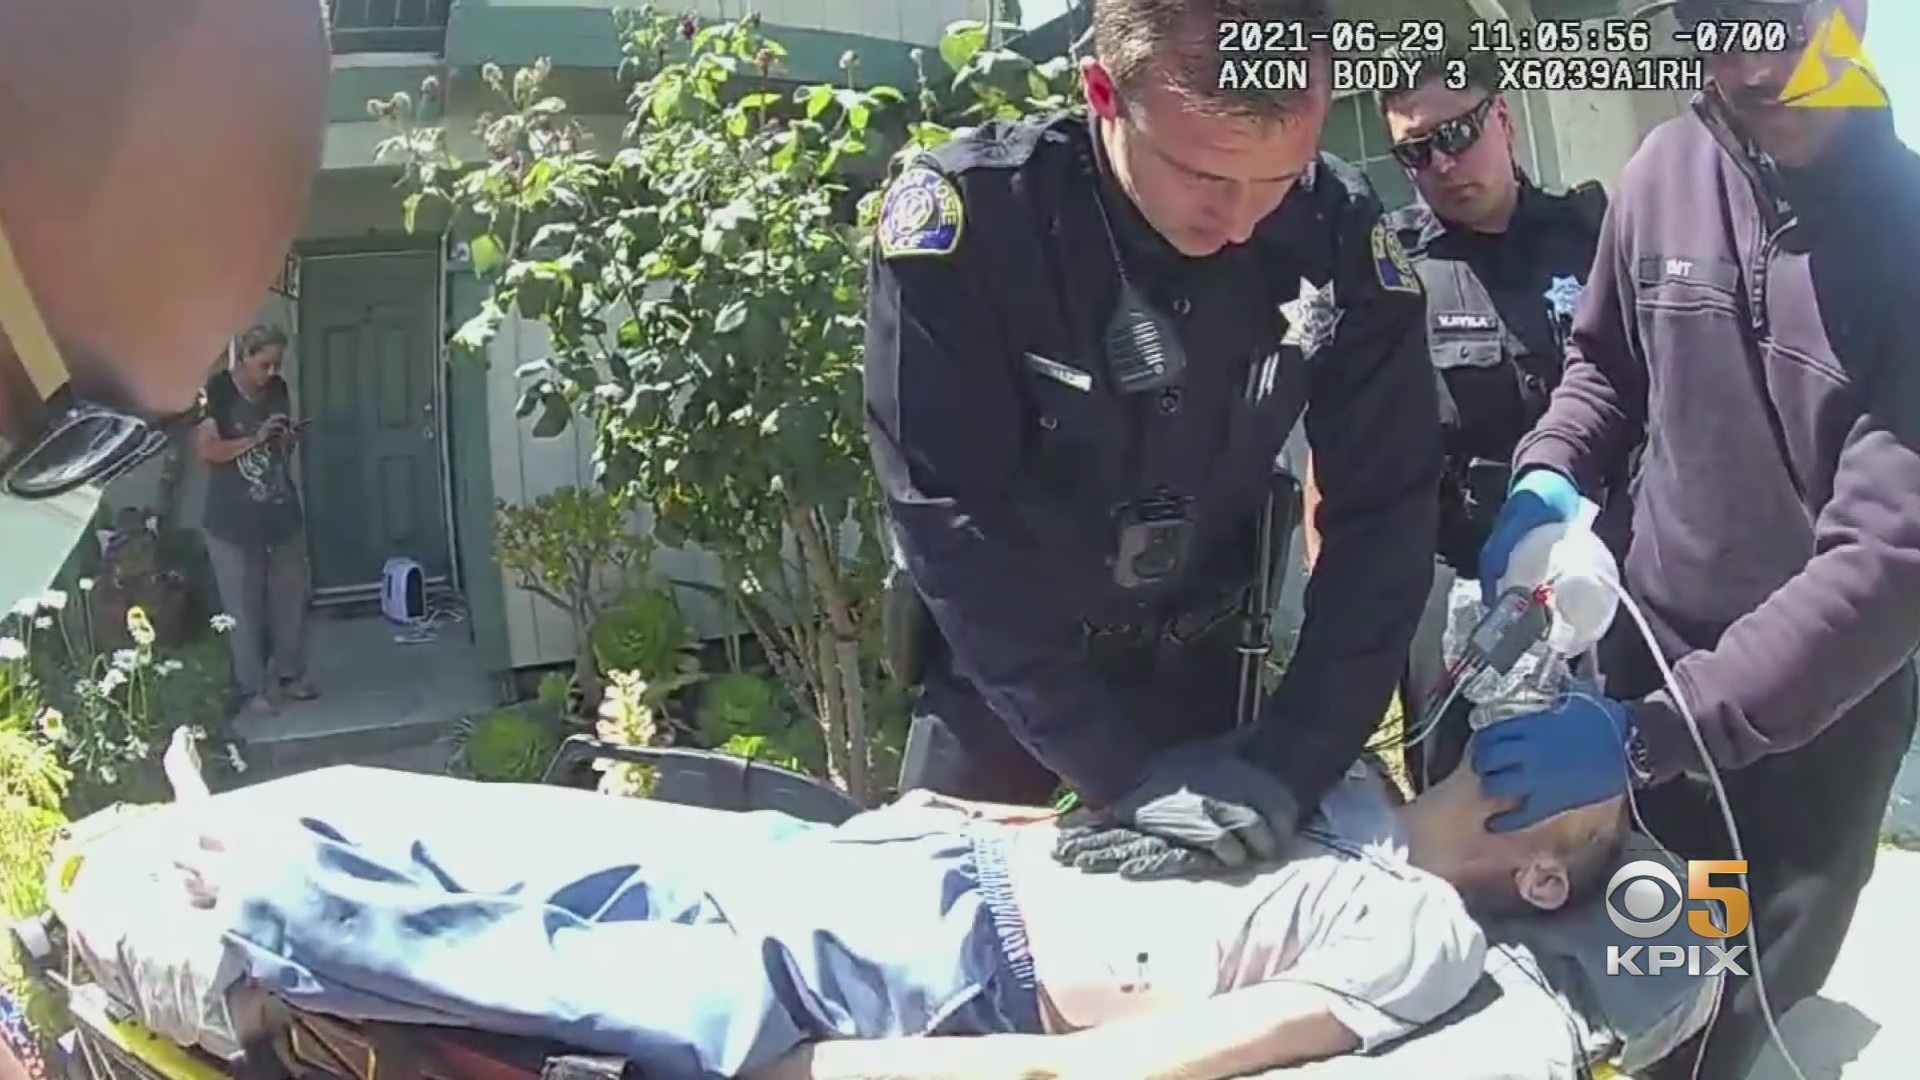 Body cam footage of Officer Christopher Reed performing chest compressions on a woman who suffered a heart attack following a house fire on June 29, 2021. (CBS)